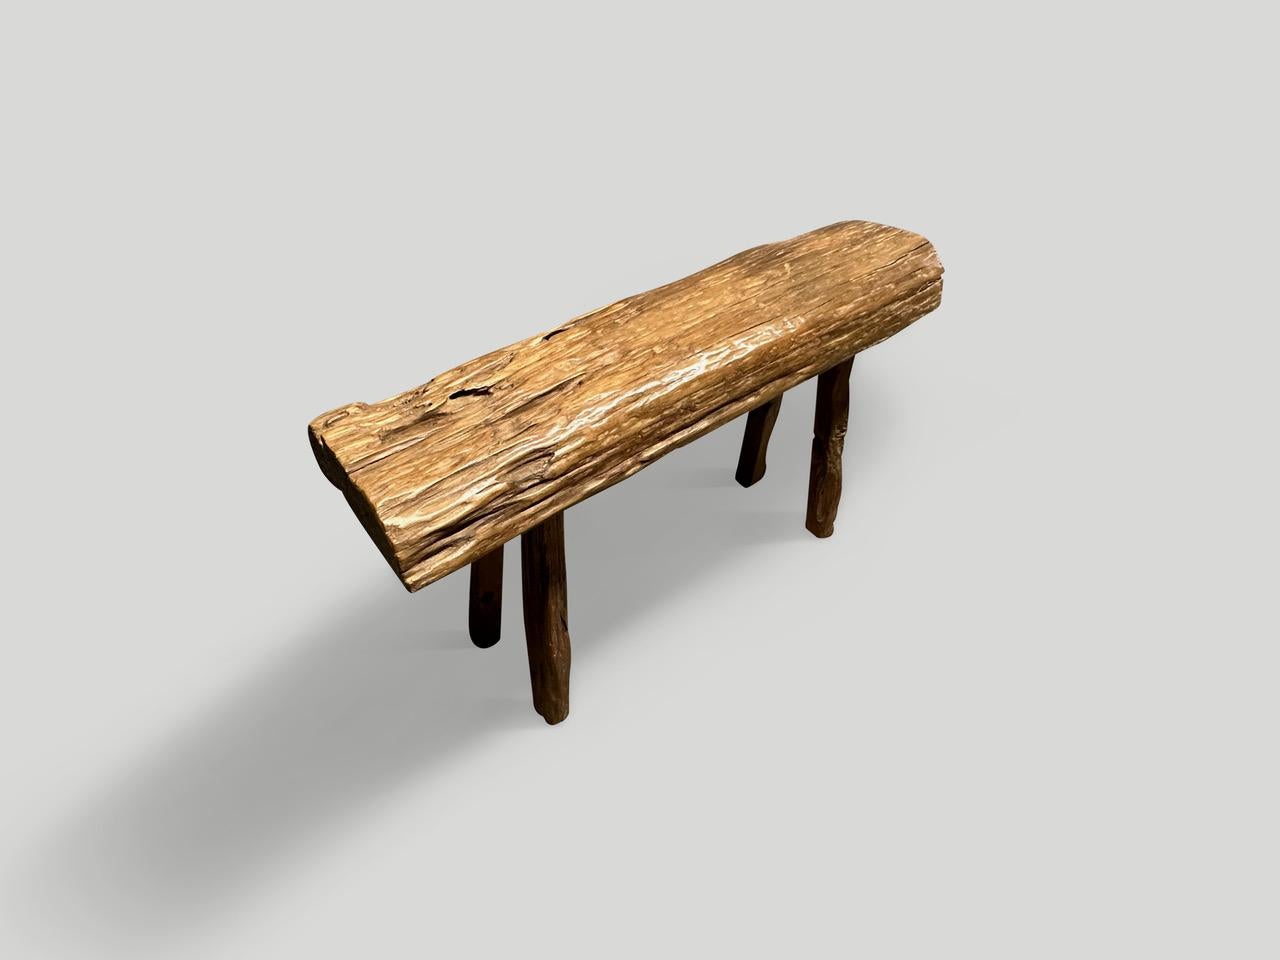 Antique bench with beautiful character hand made from a three inch thick teak log. Circa 1950. 

This bench was hand made in the spirit of Wabi-Sabi, a Japanese philosophy that beauty can be found in imperfection and impermanence. It is a beauty of